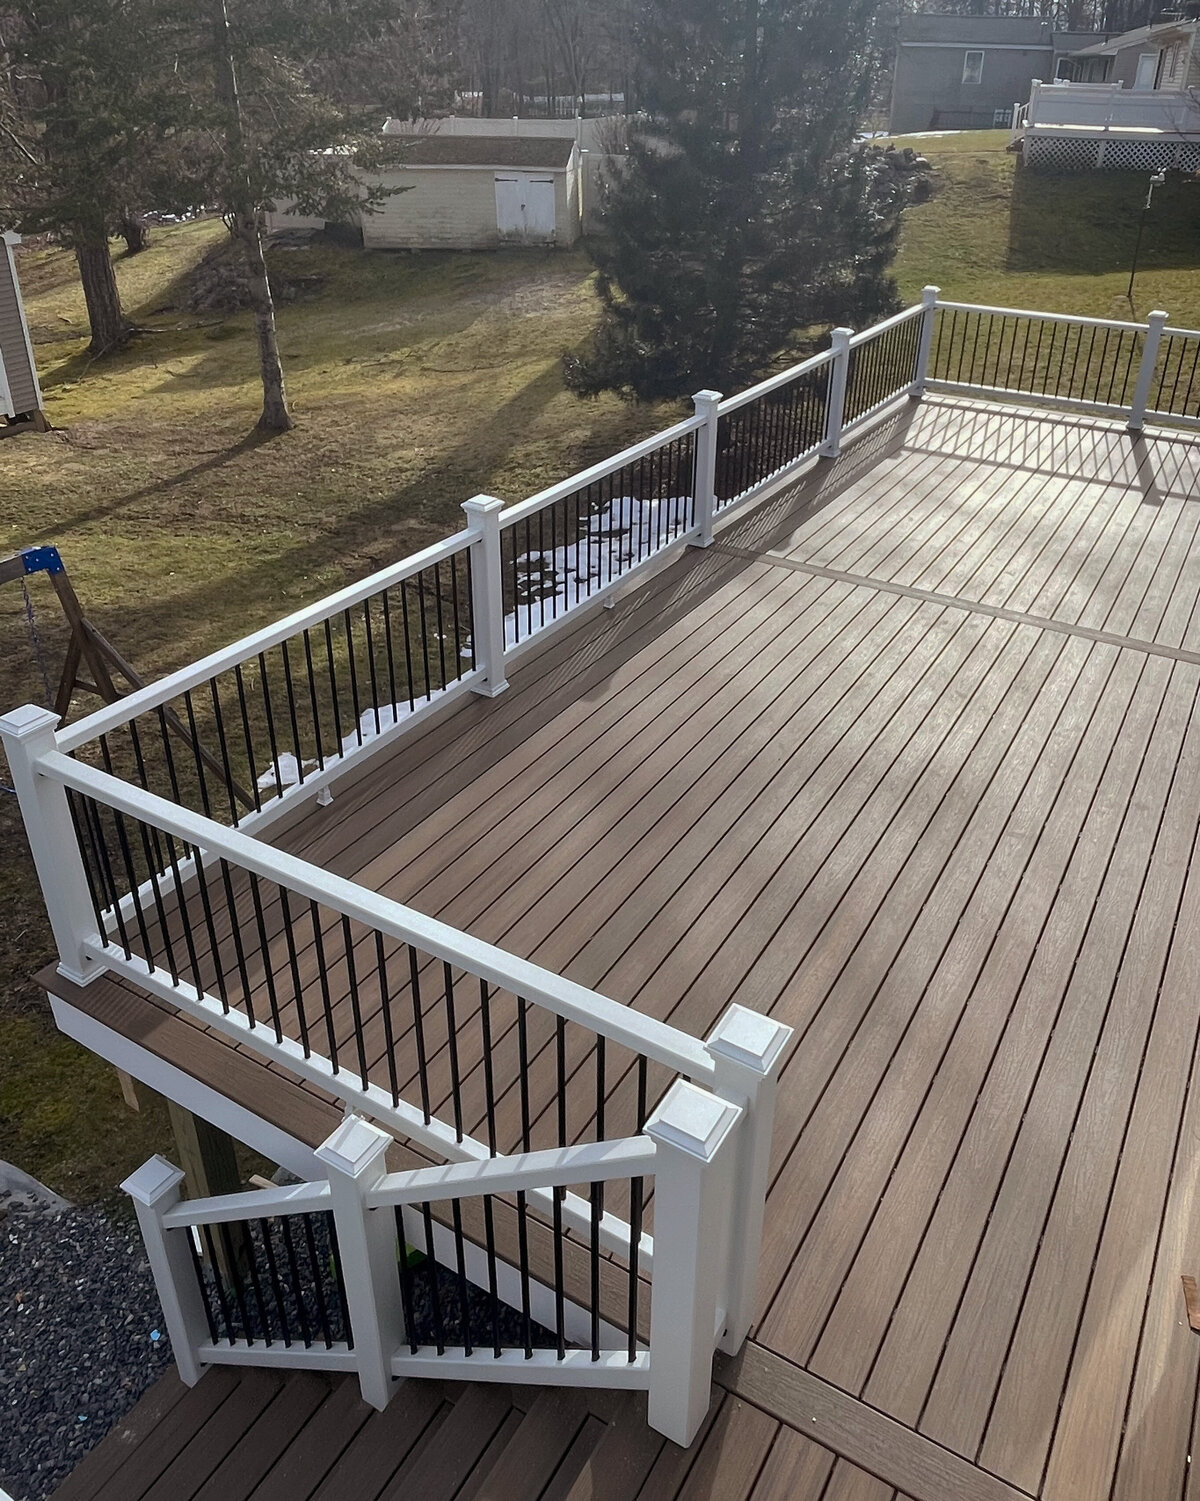 A view down onto a large open deck with composite flooring and white and black PPVC railings with snow on the ground